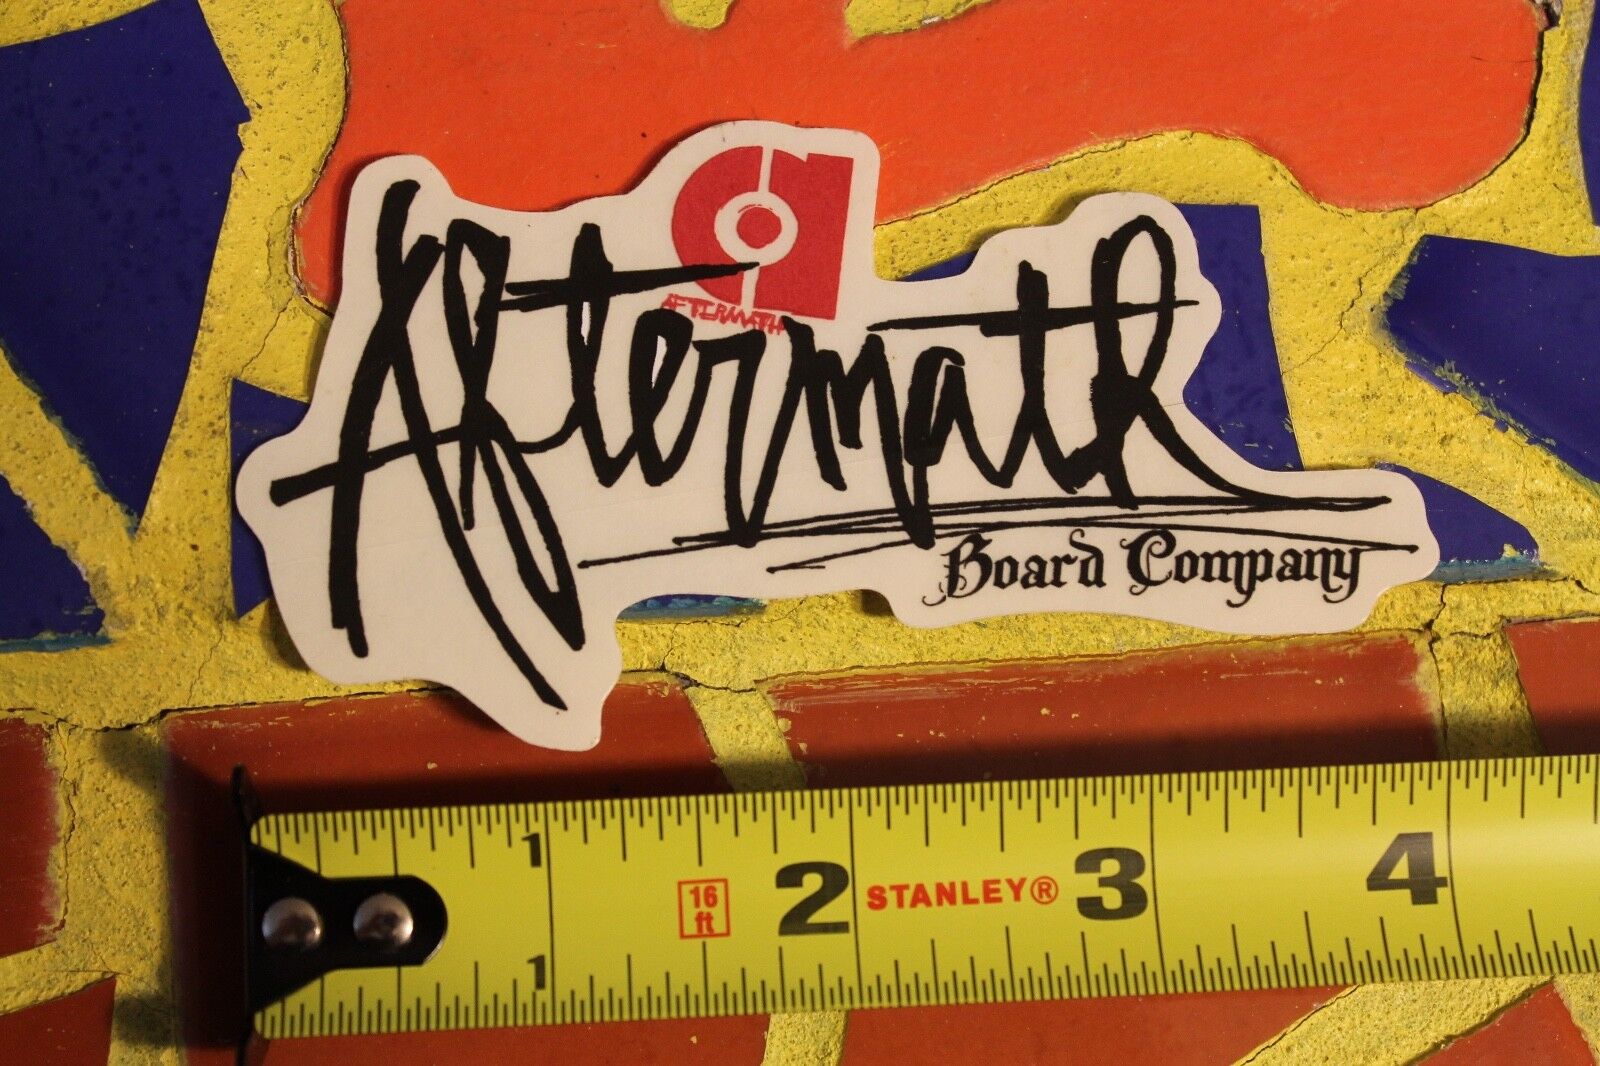 AFTERMATH Sale Choice special price Ian Wright Spyder Surfboards Vintage STI Decal Surfing